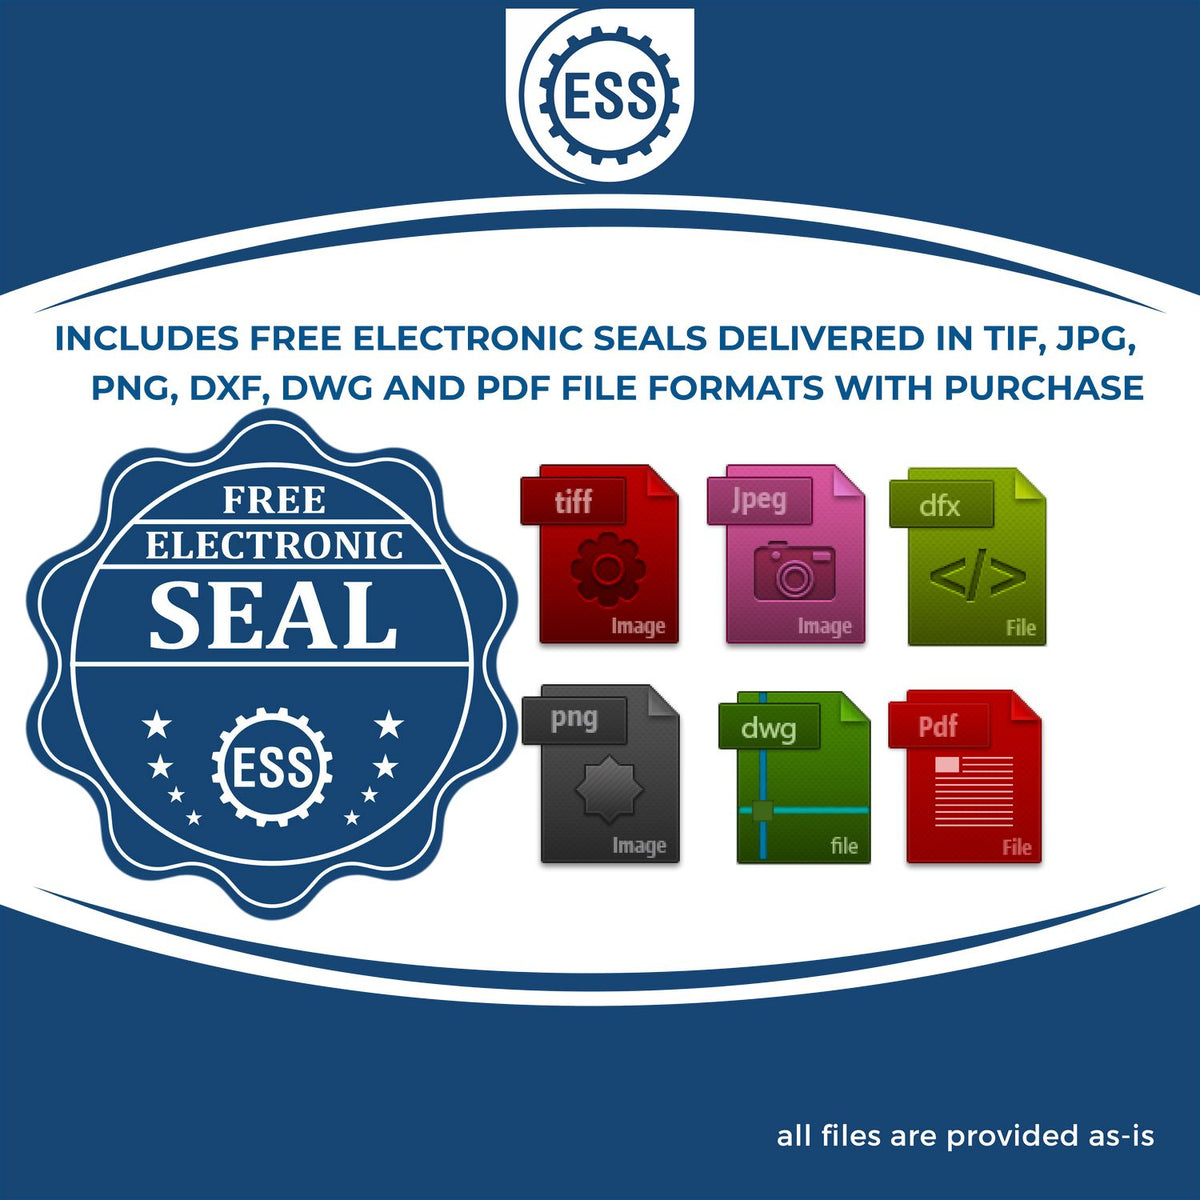 An infographic for the free electronic seal for the PSI Illinois Notary Stamp illustrating the different file type icons such as DXF, DWG, TIF, JPG and PNG.